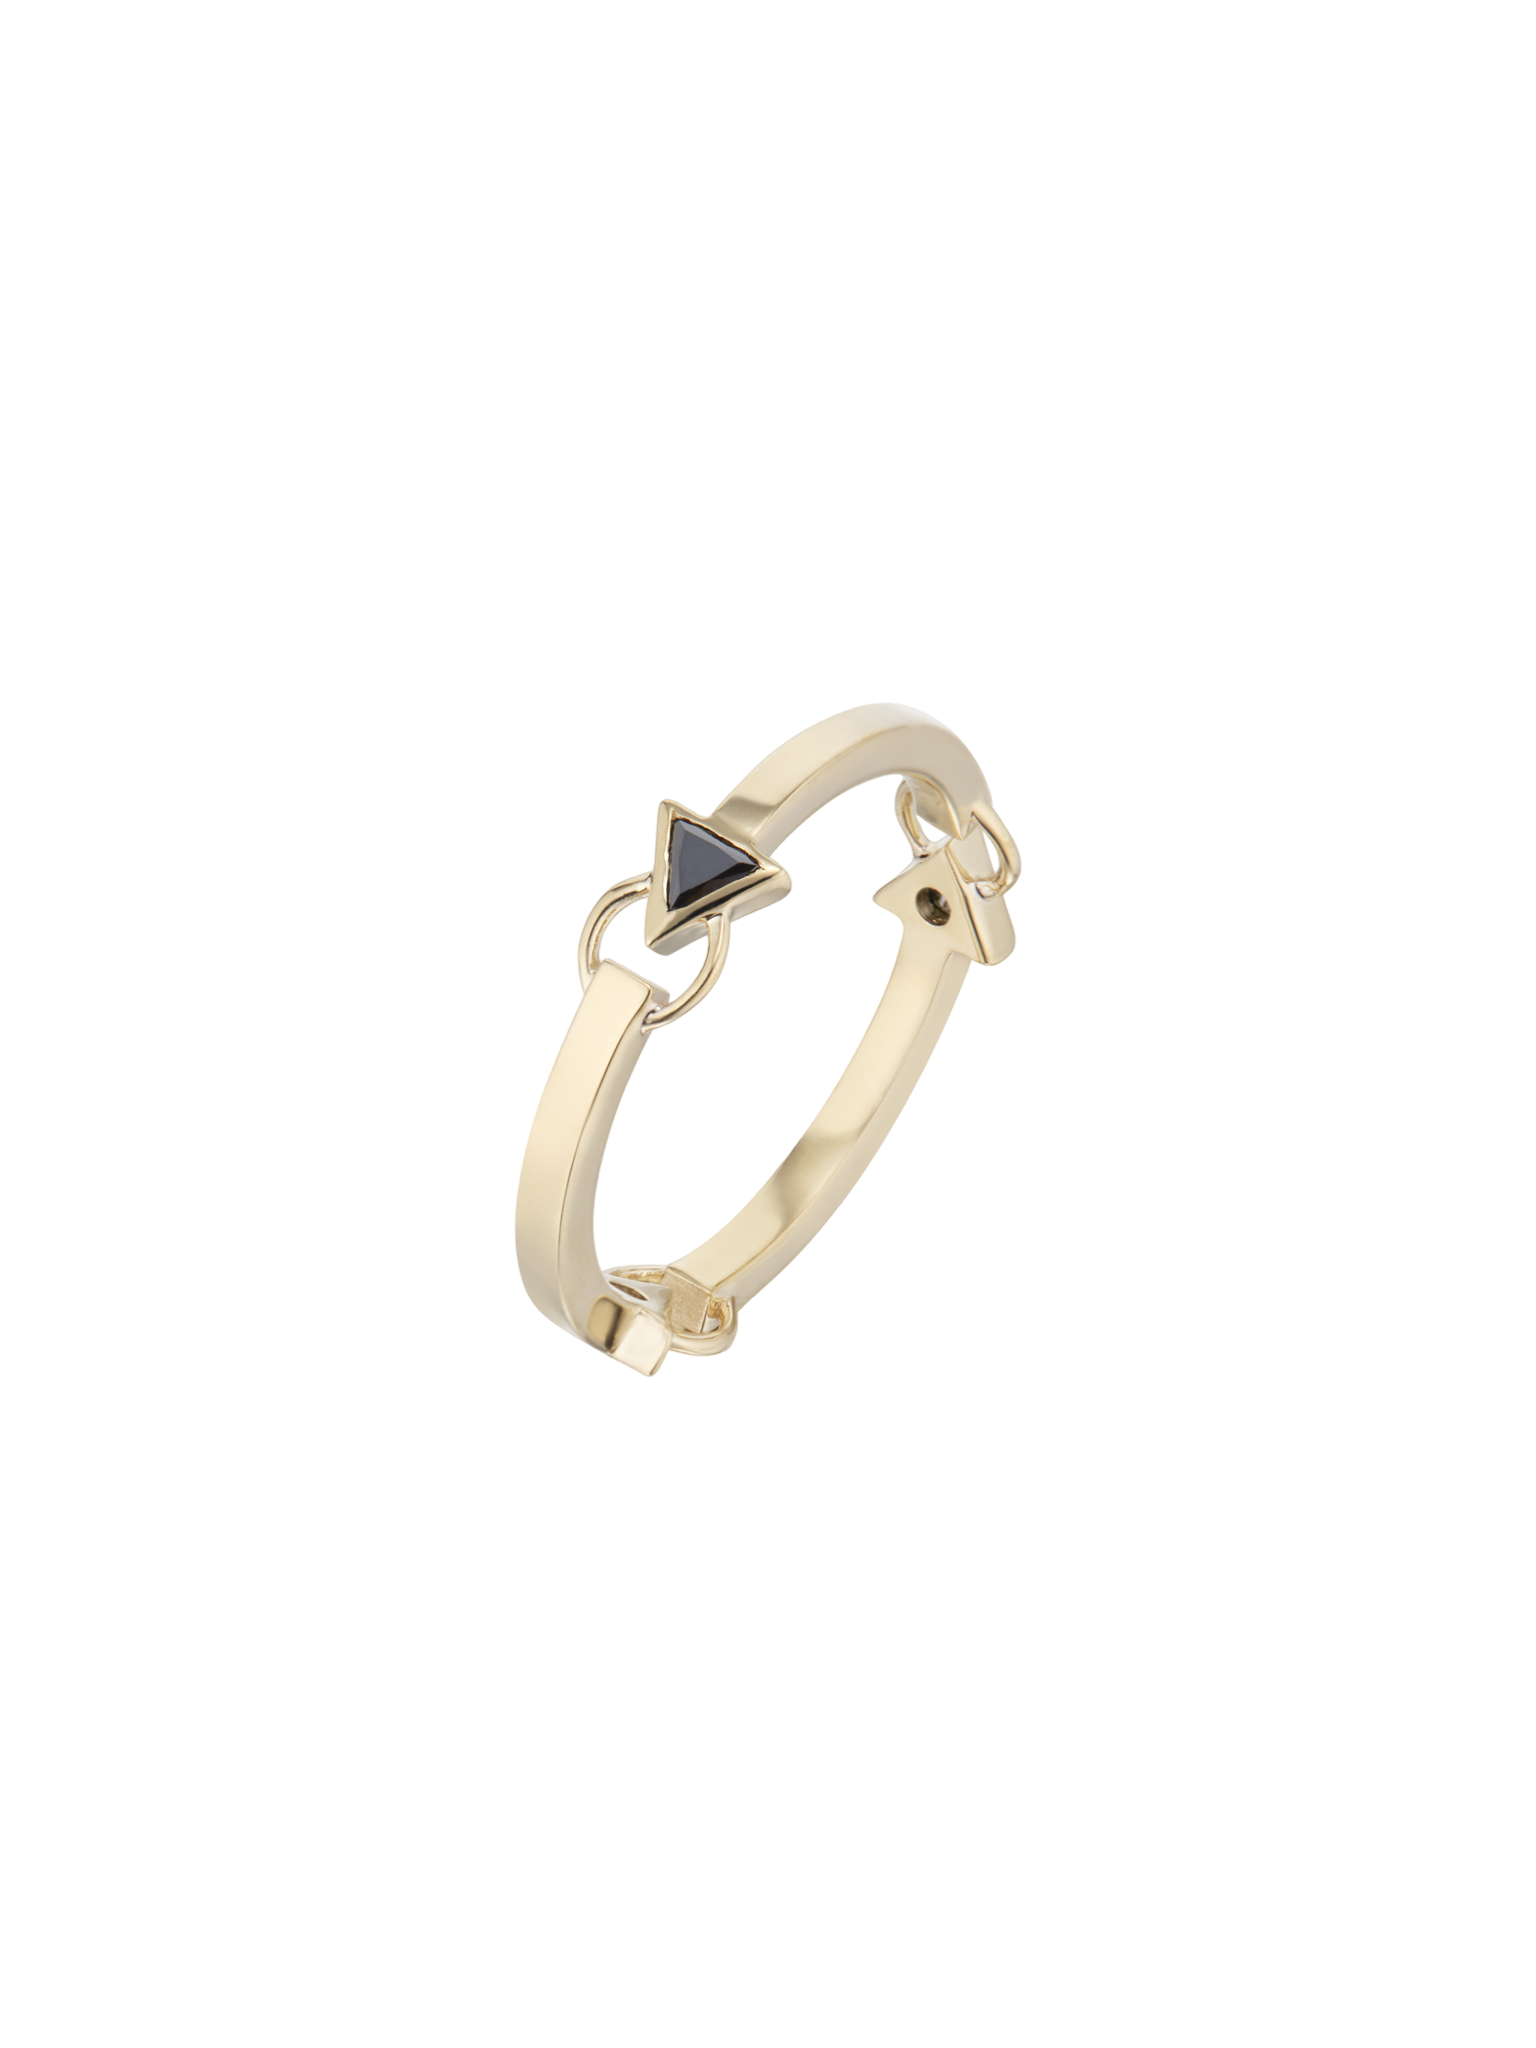 Foundation shape trio stacking ring